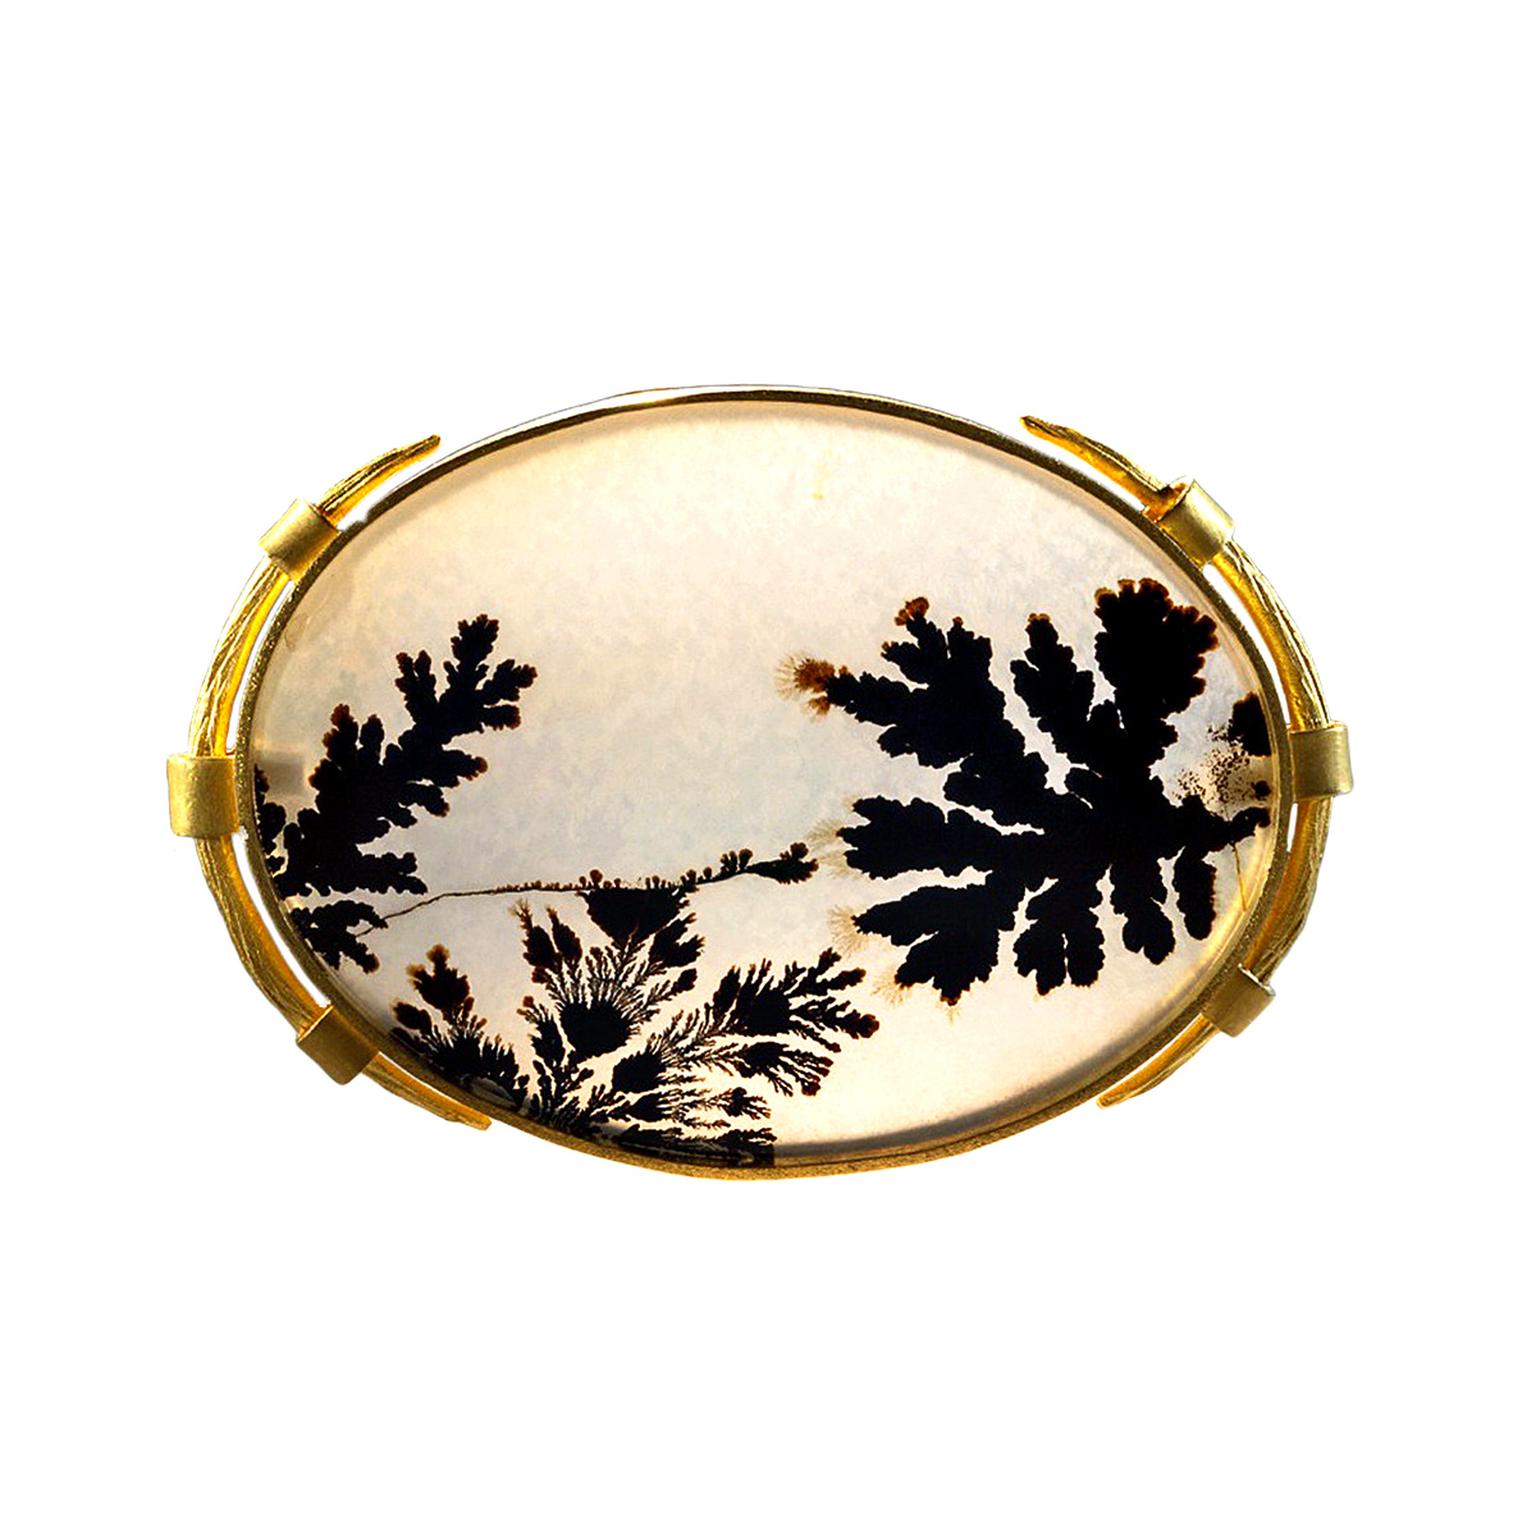 Lilly Fitzgerald dendritic agate brooch